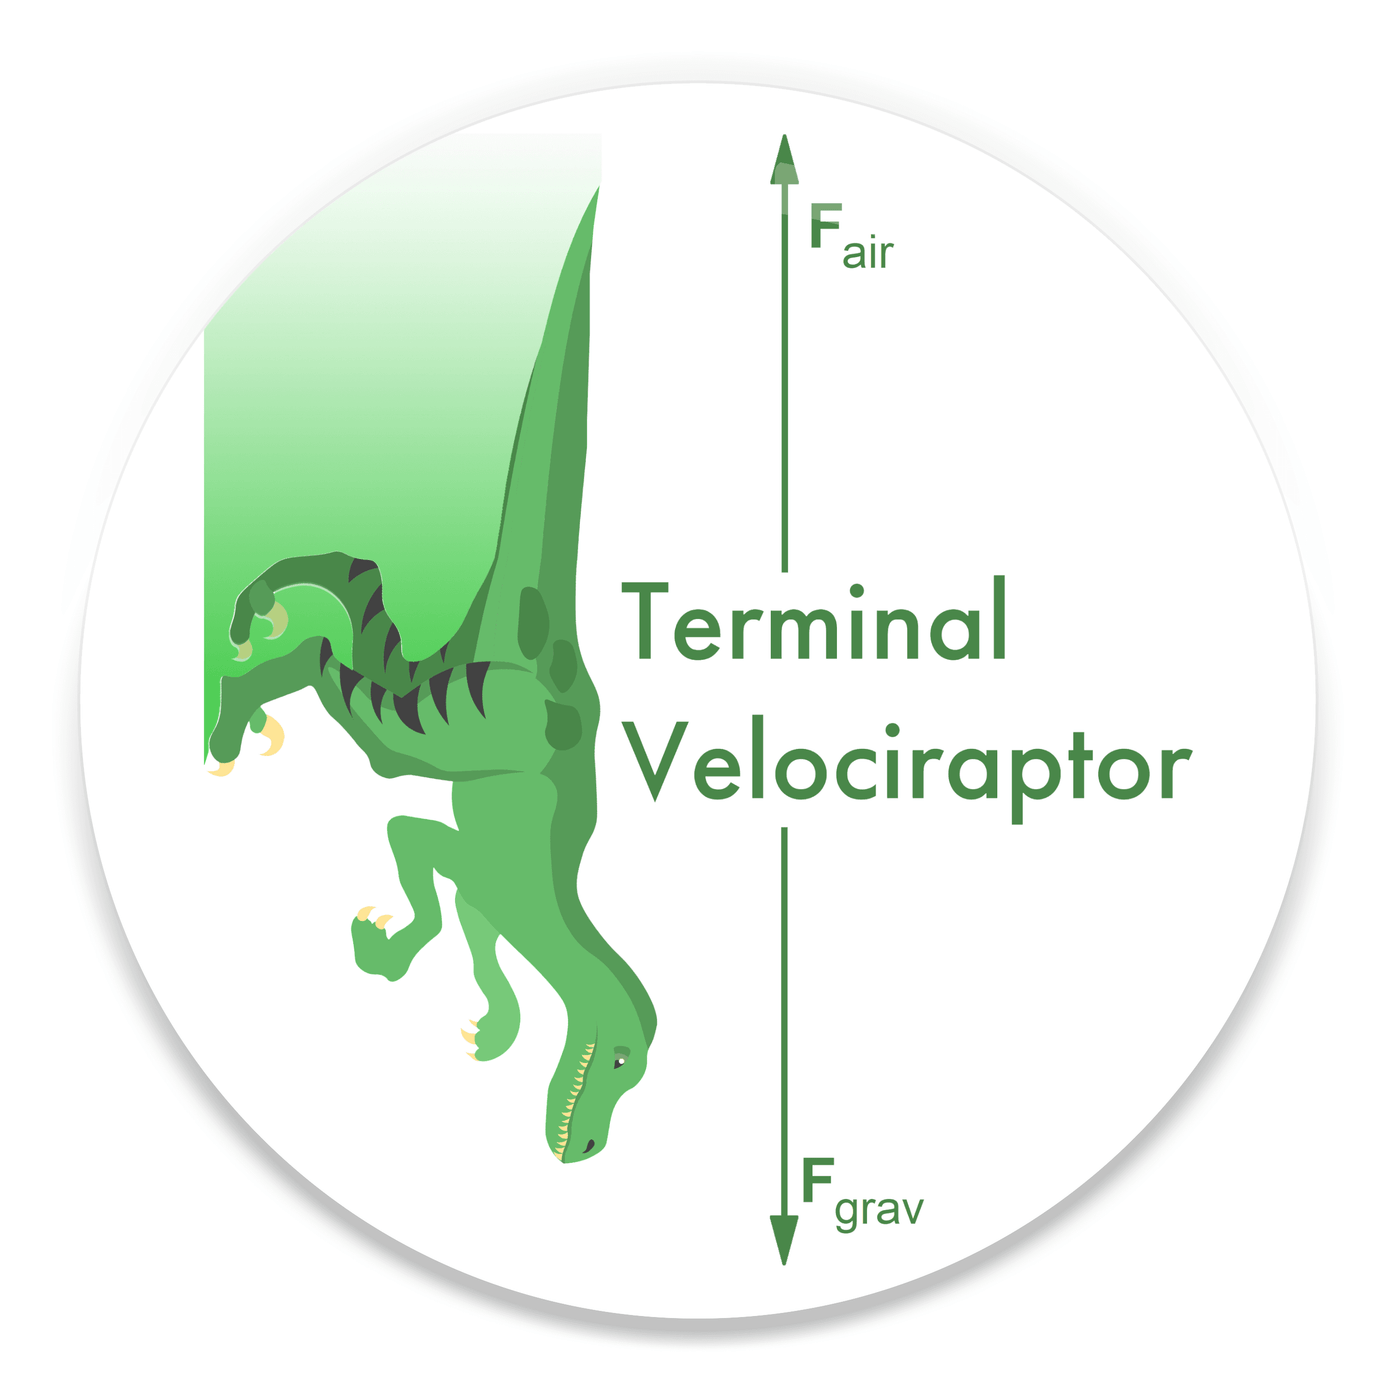 2.25 inch round colorful magnet with image of a velociraptor and text that says terminal velociraptor